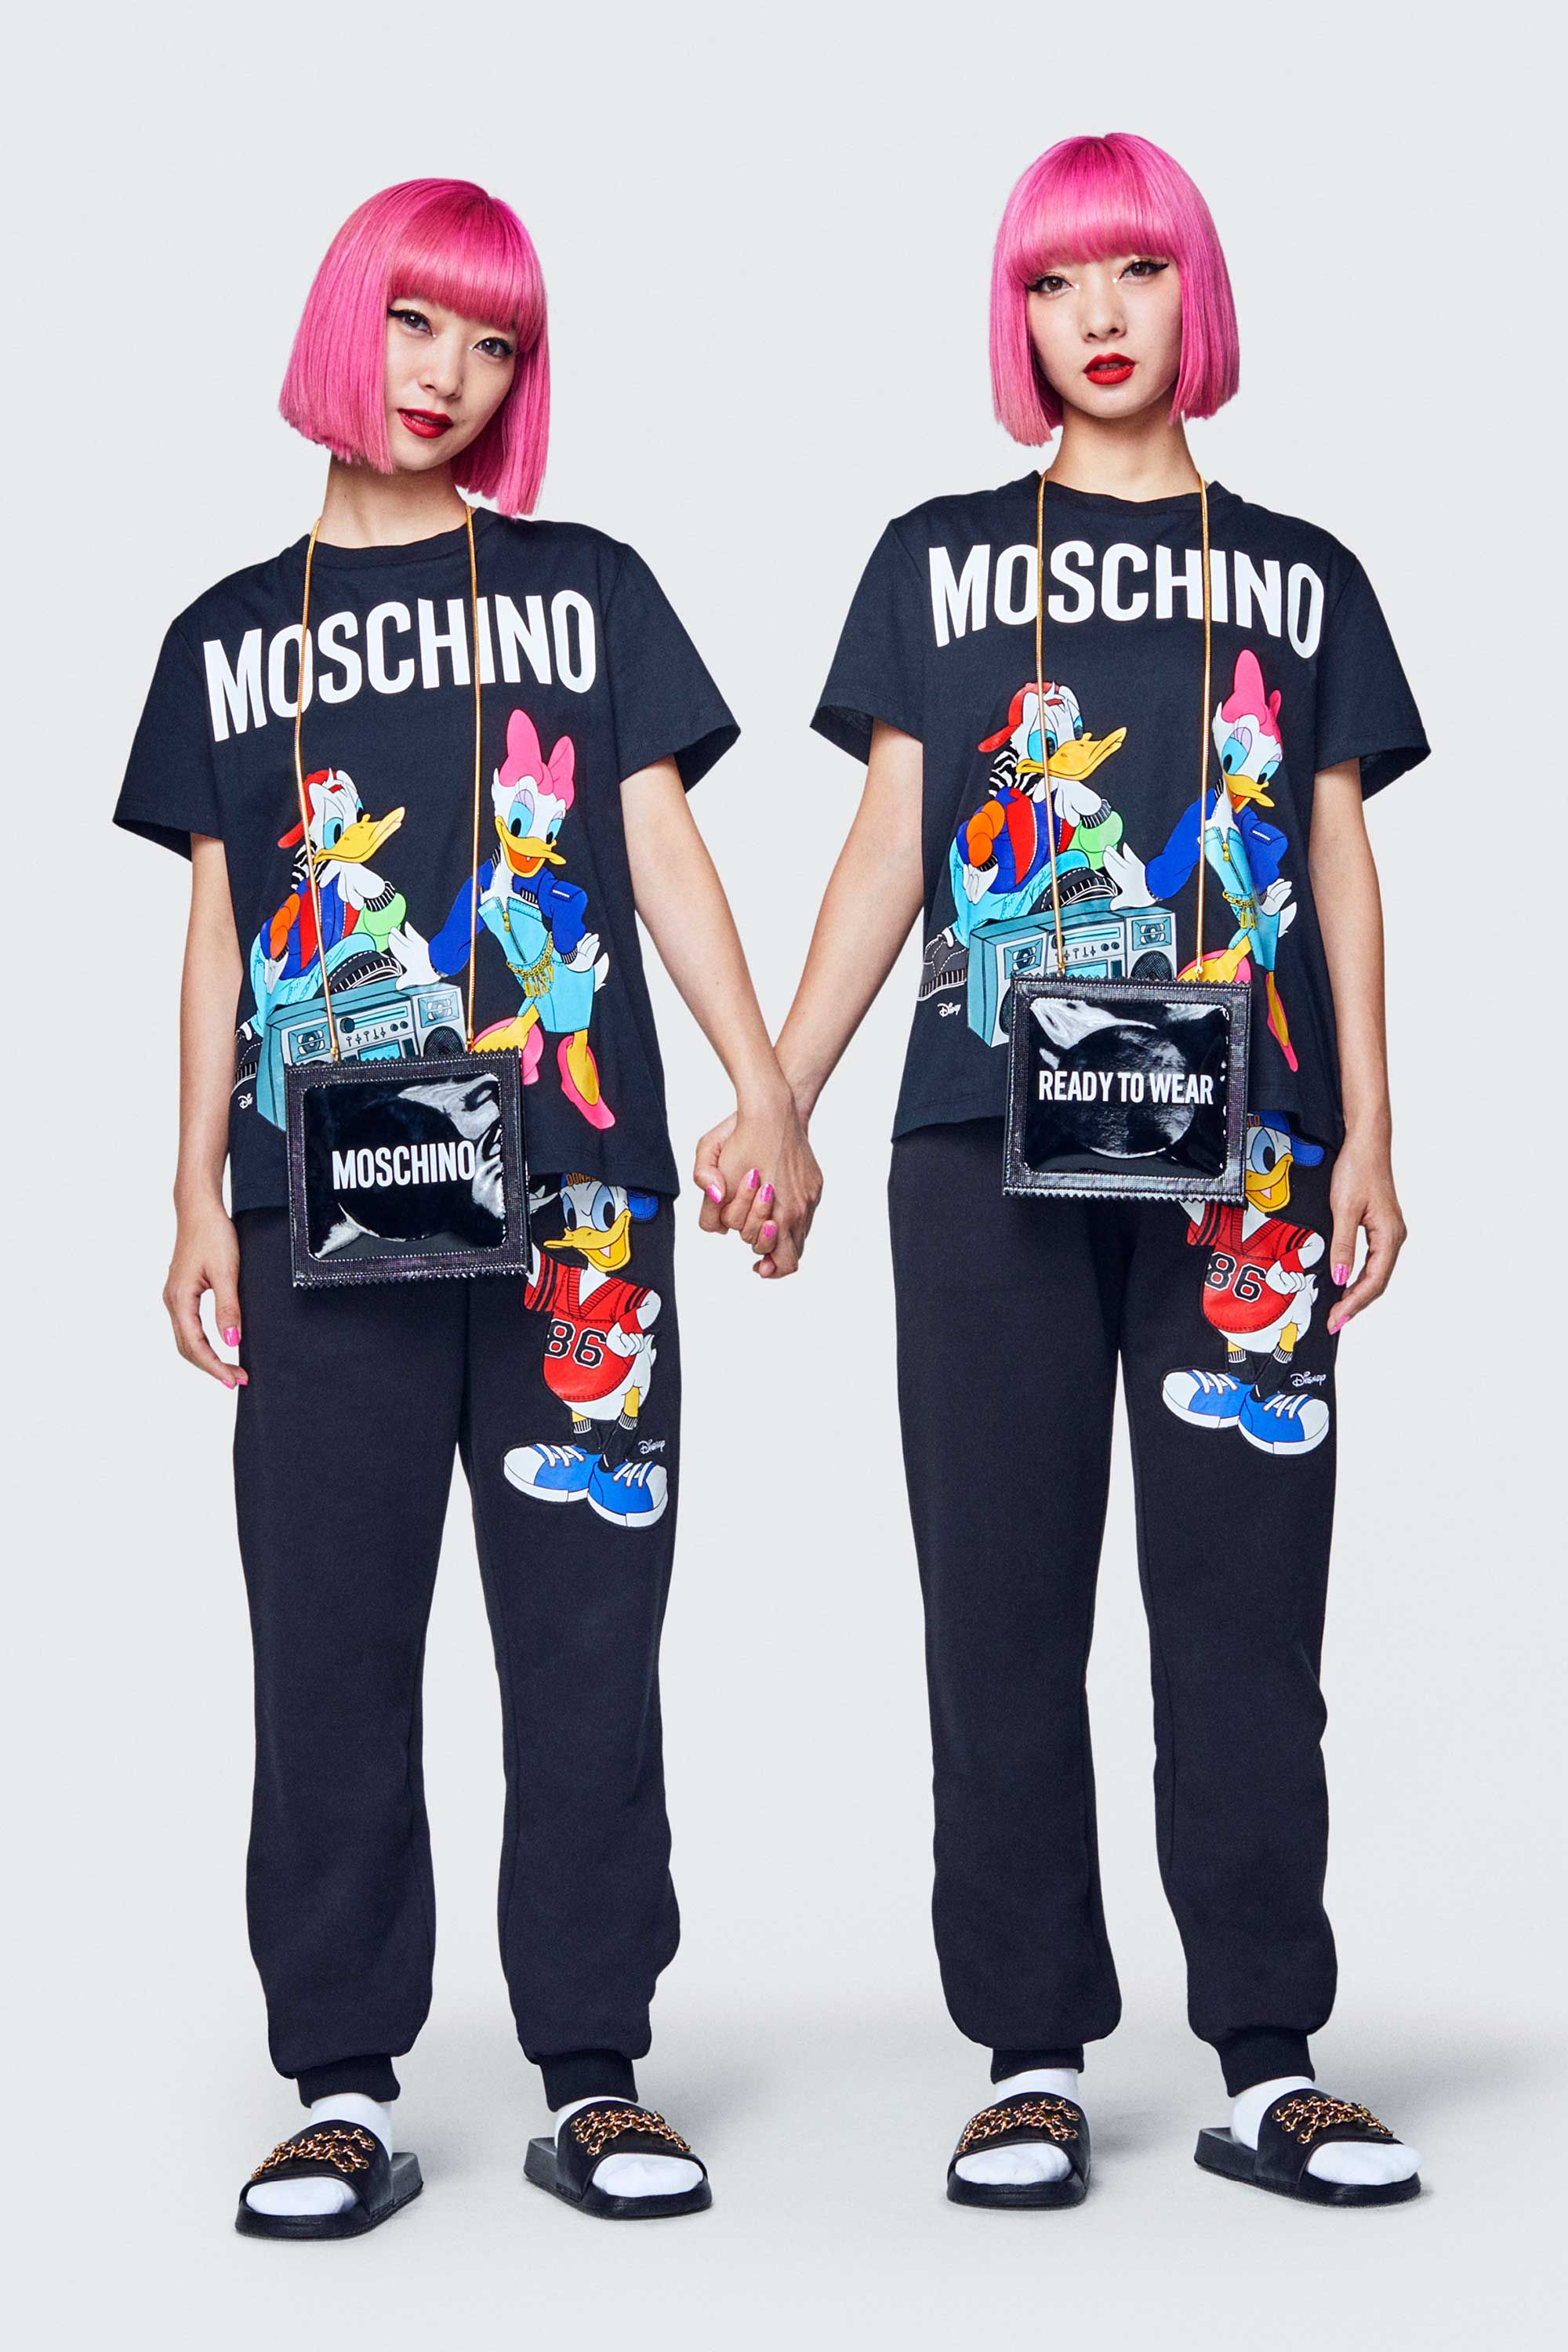 H&m And Moschino Collaboration Top Sellers, 52% OFF | lagence.tv